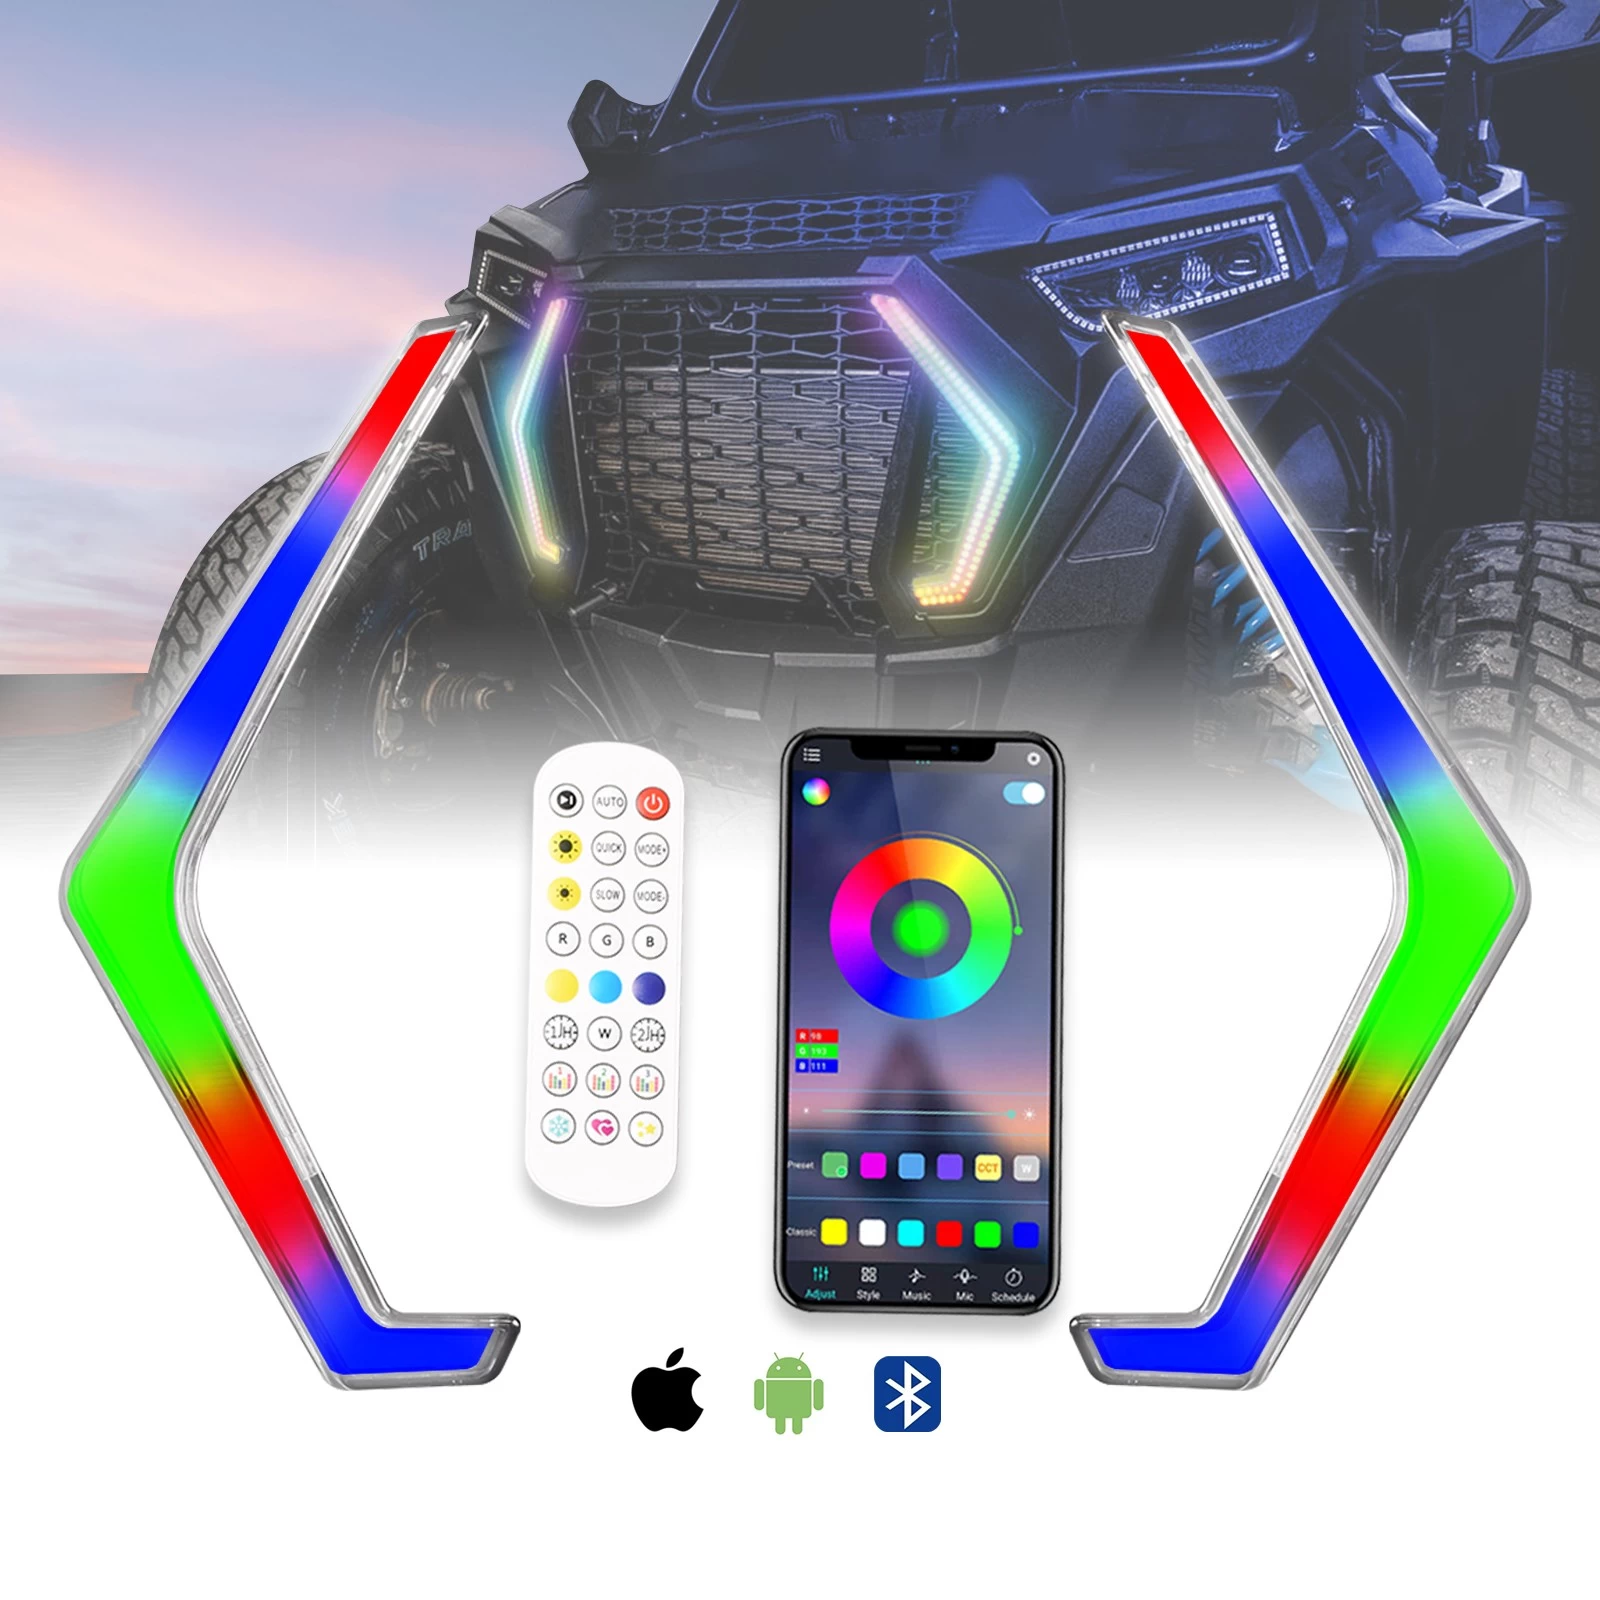 China Unionlux RZR Turn Signal Fang Lights , LED Turn Signal light with Chasing Color ,Remote Control, Front Signature Accent Fang Light Assembly for Polaris RZR XP 1000 Turbo 2019 2020 2021 fabricante